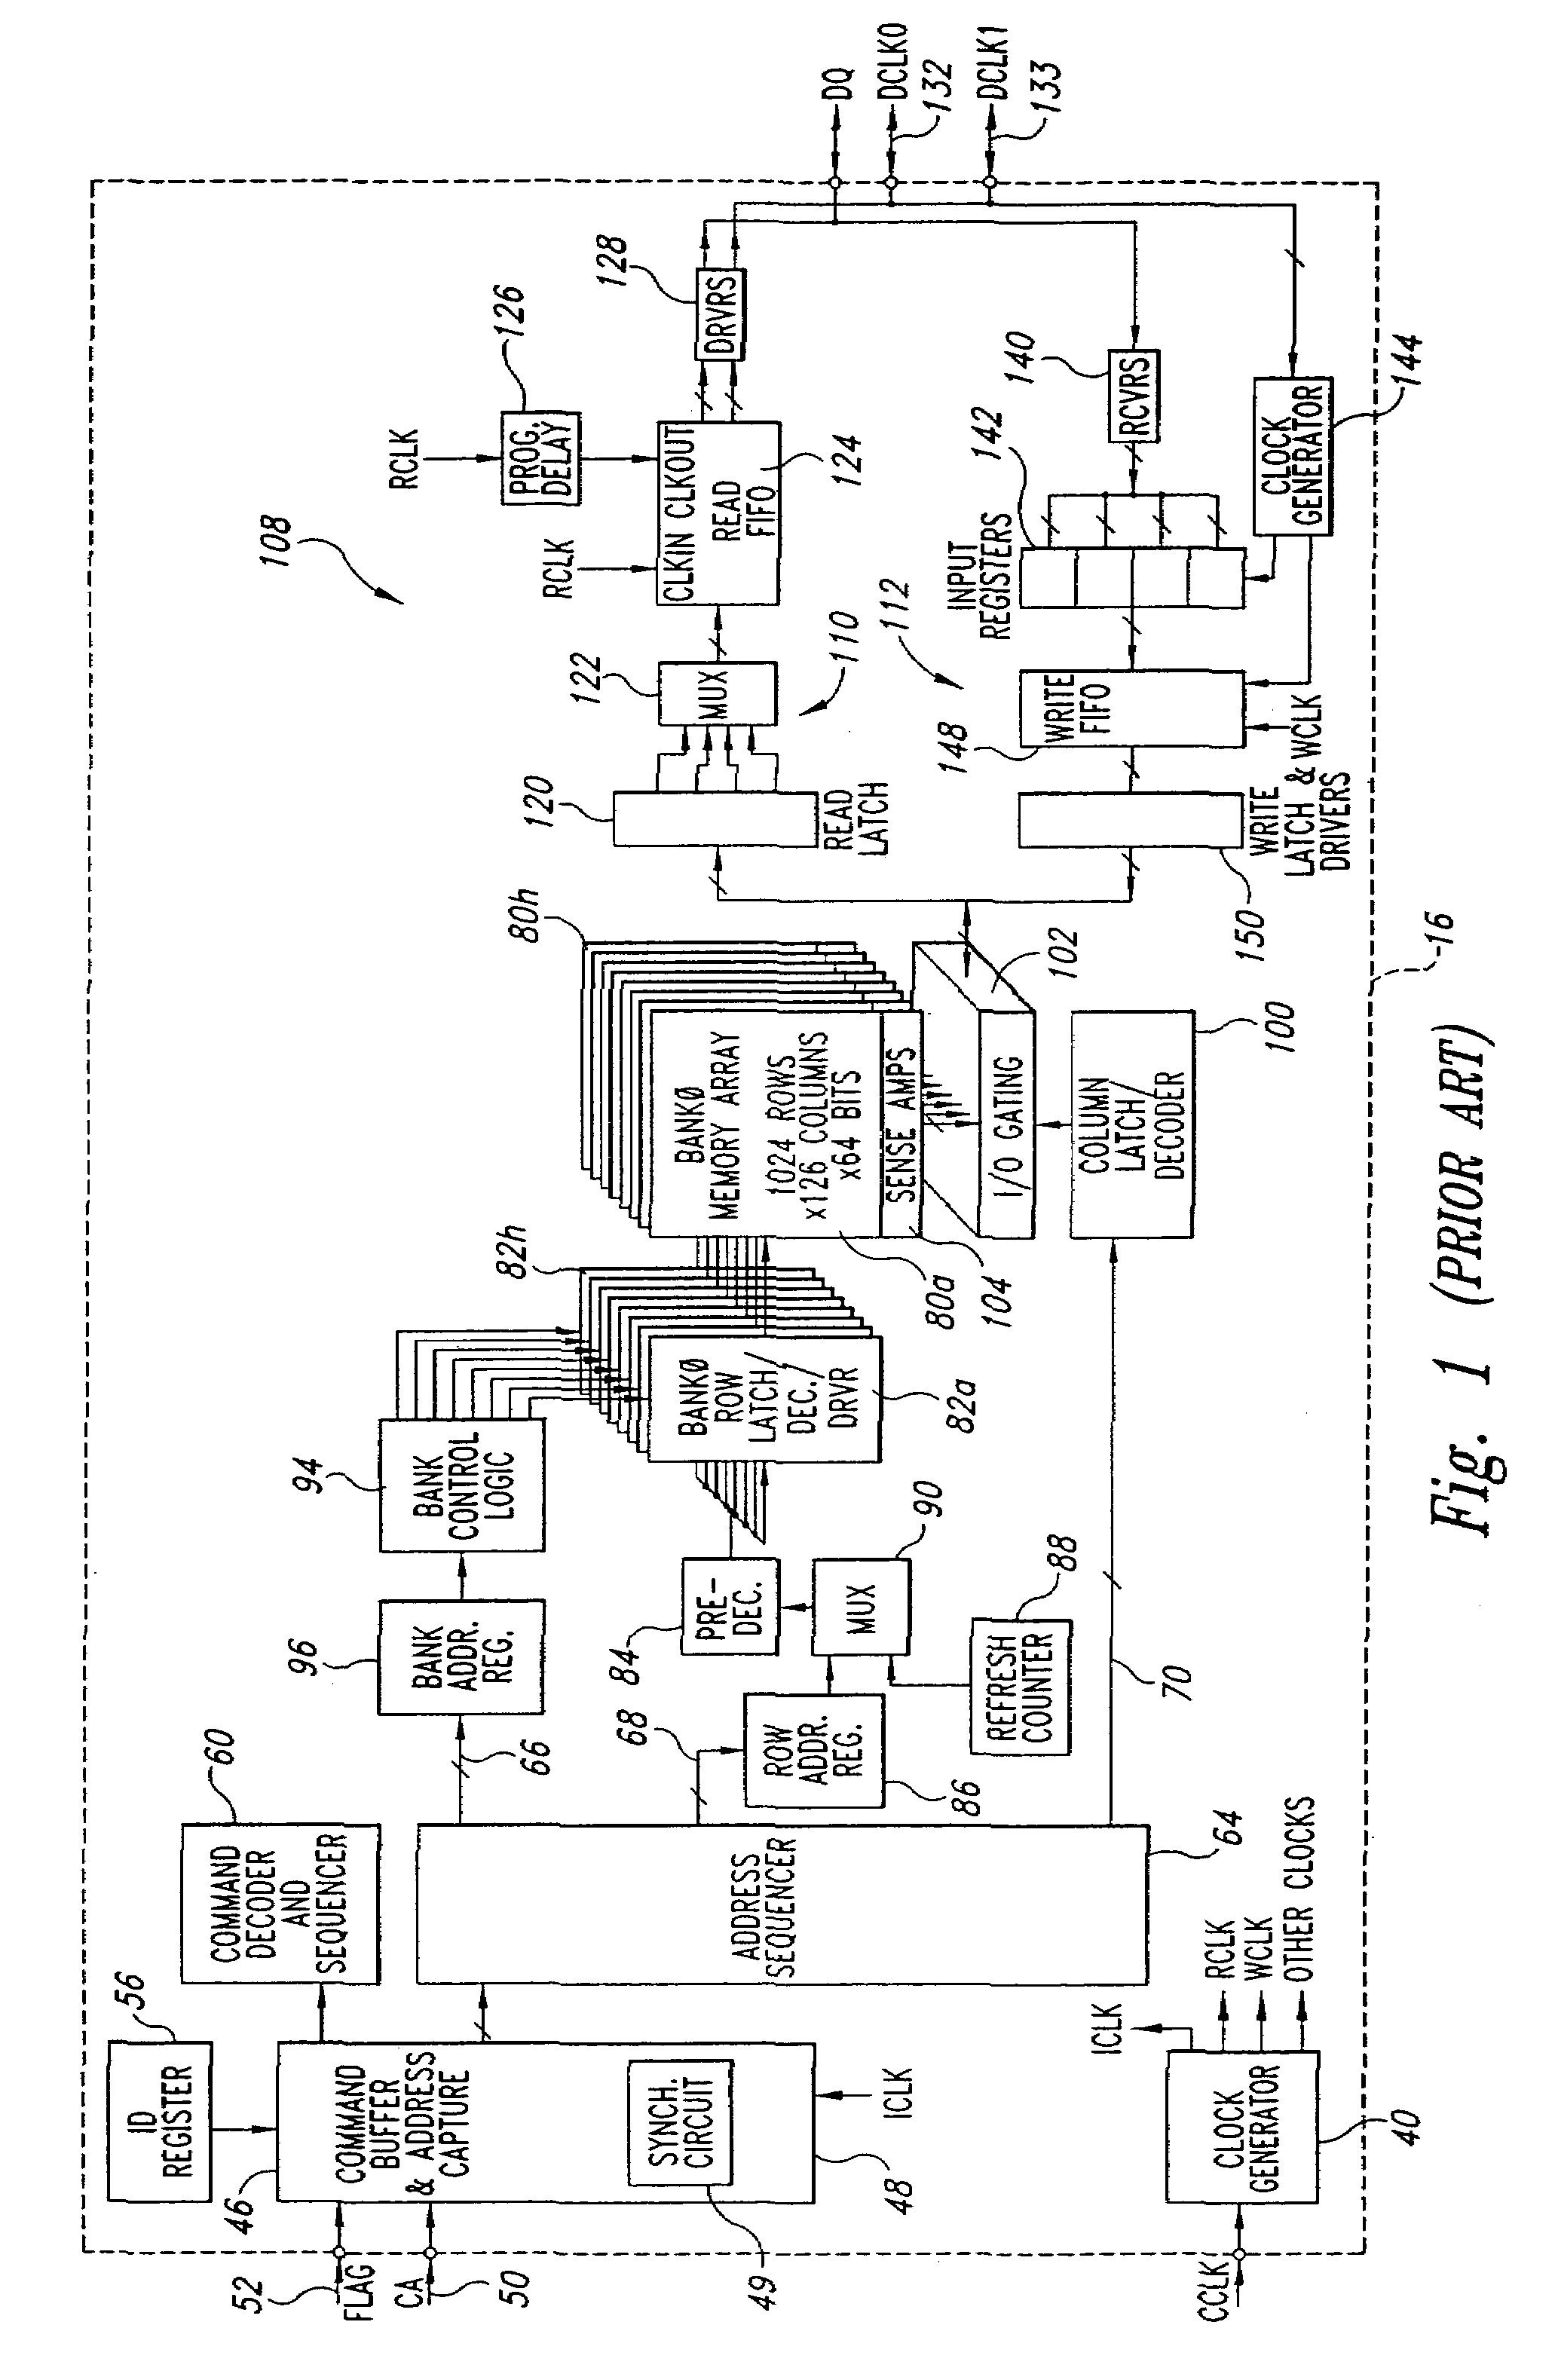 Method and apparatus for generating expect data from a captured bit pattern, and memory device using same